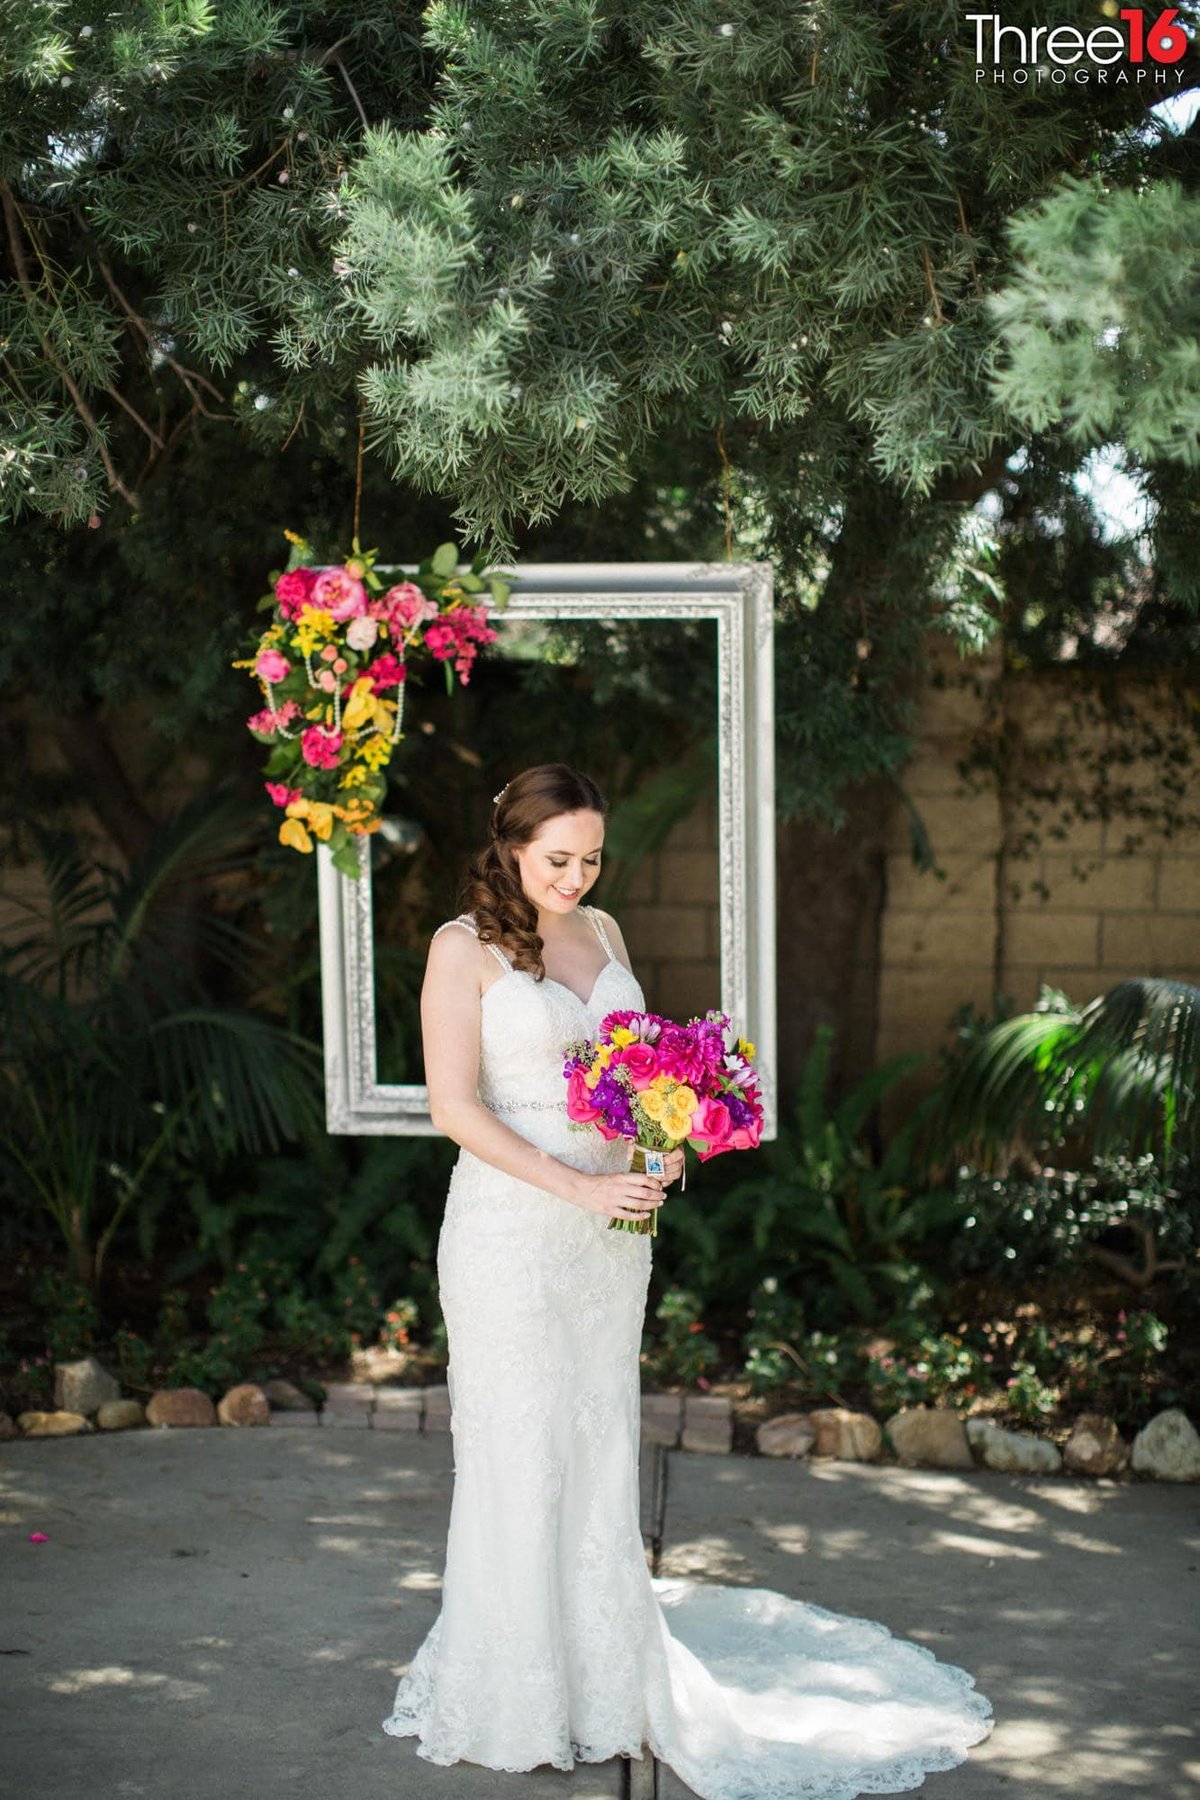 Bride poses with her bouquet and decorated picture frame